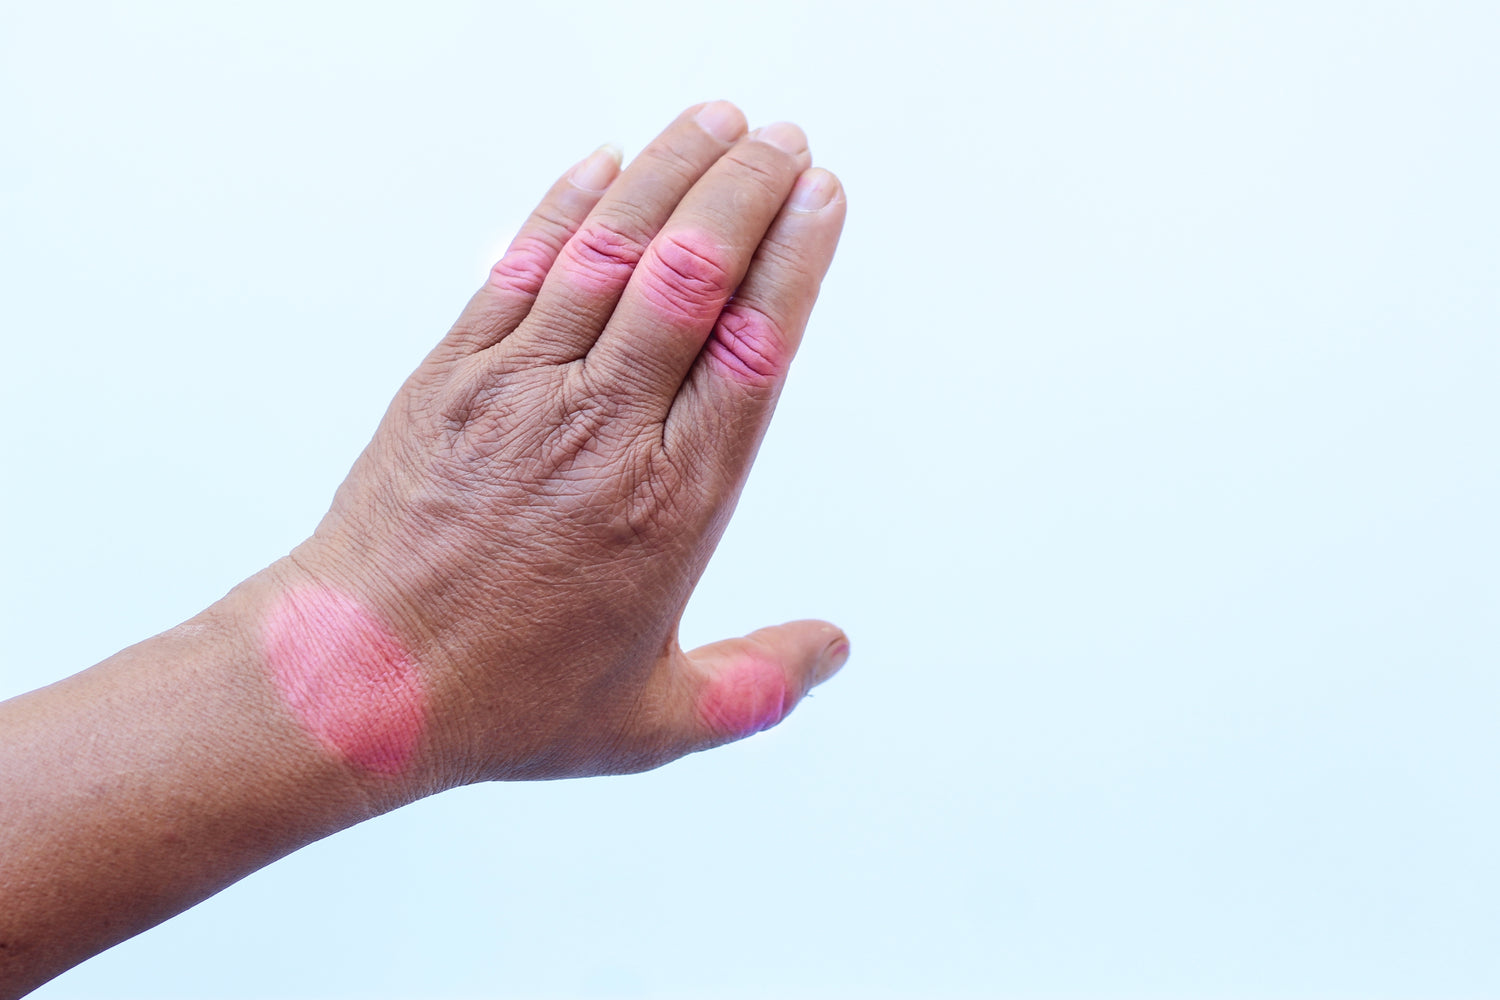 Relieving the Aches: What's the Best Solution for Rheumatoid Arthritis Pain?